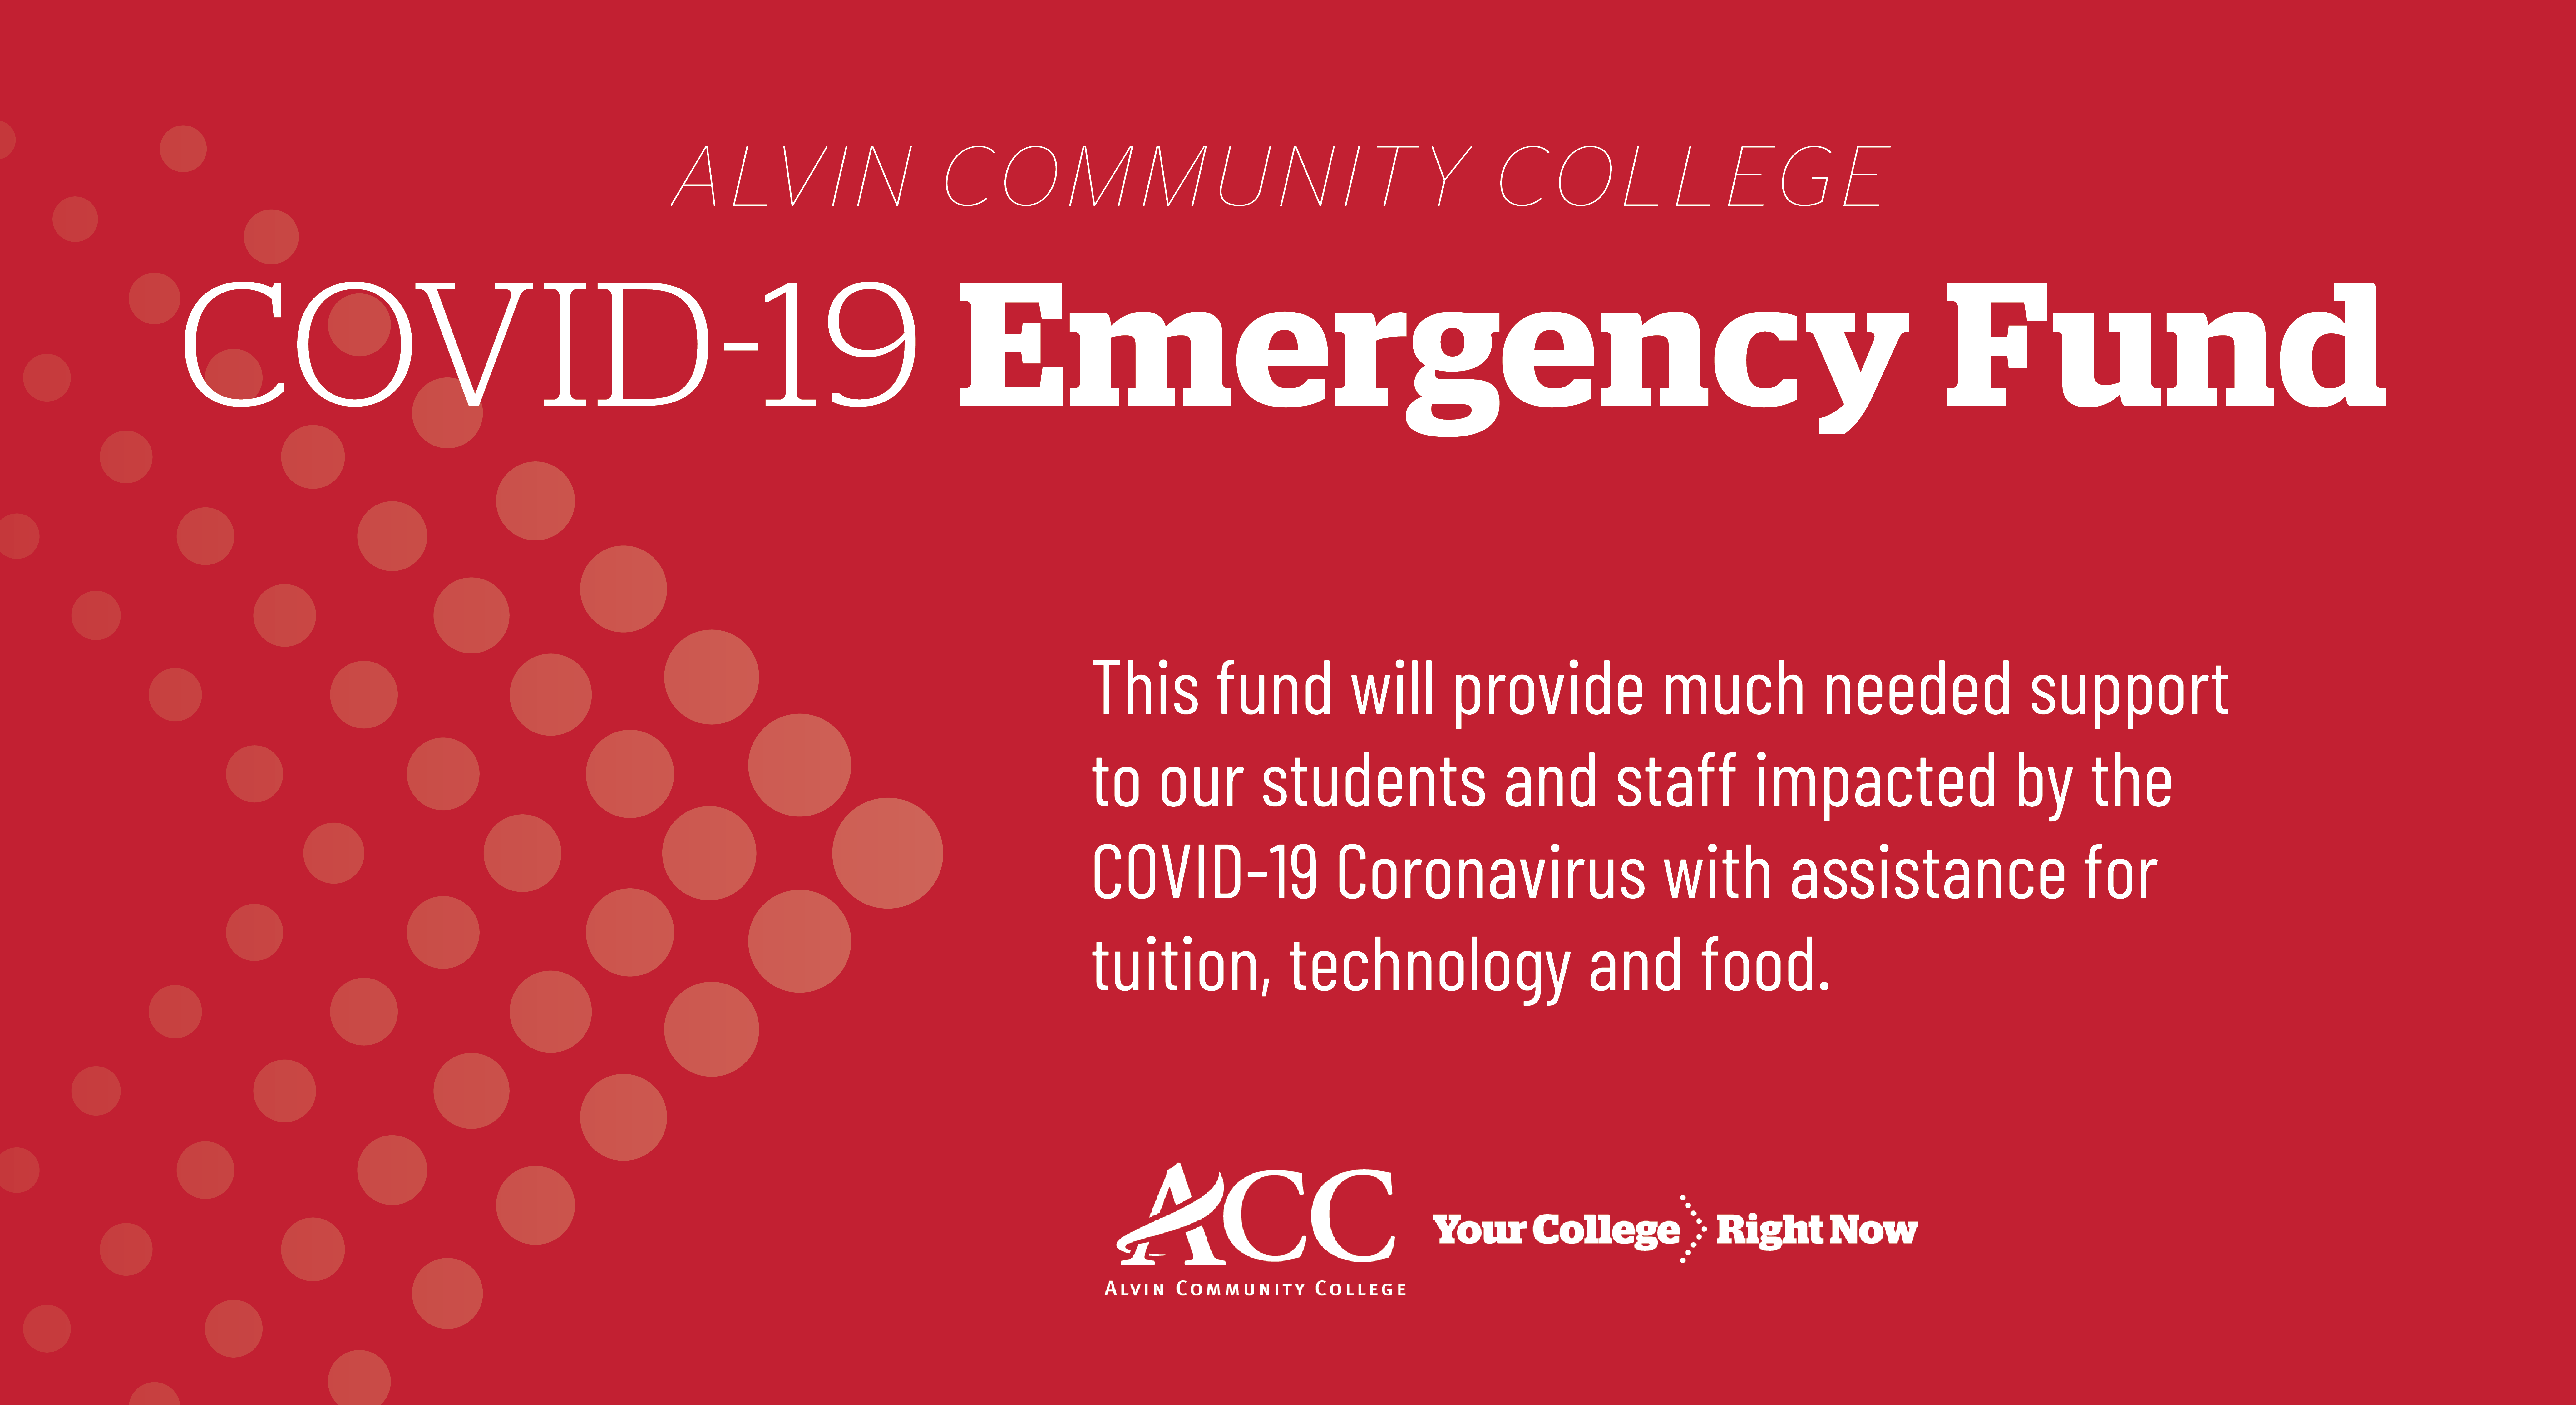 Donate to the COVID-19 Emergency Fund